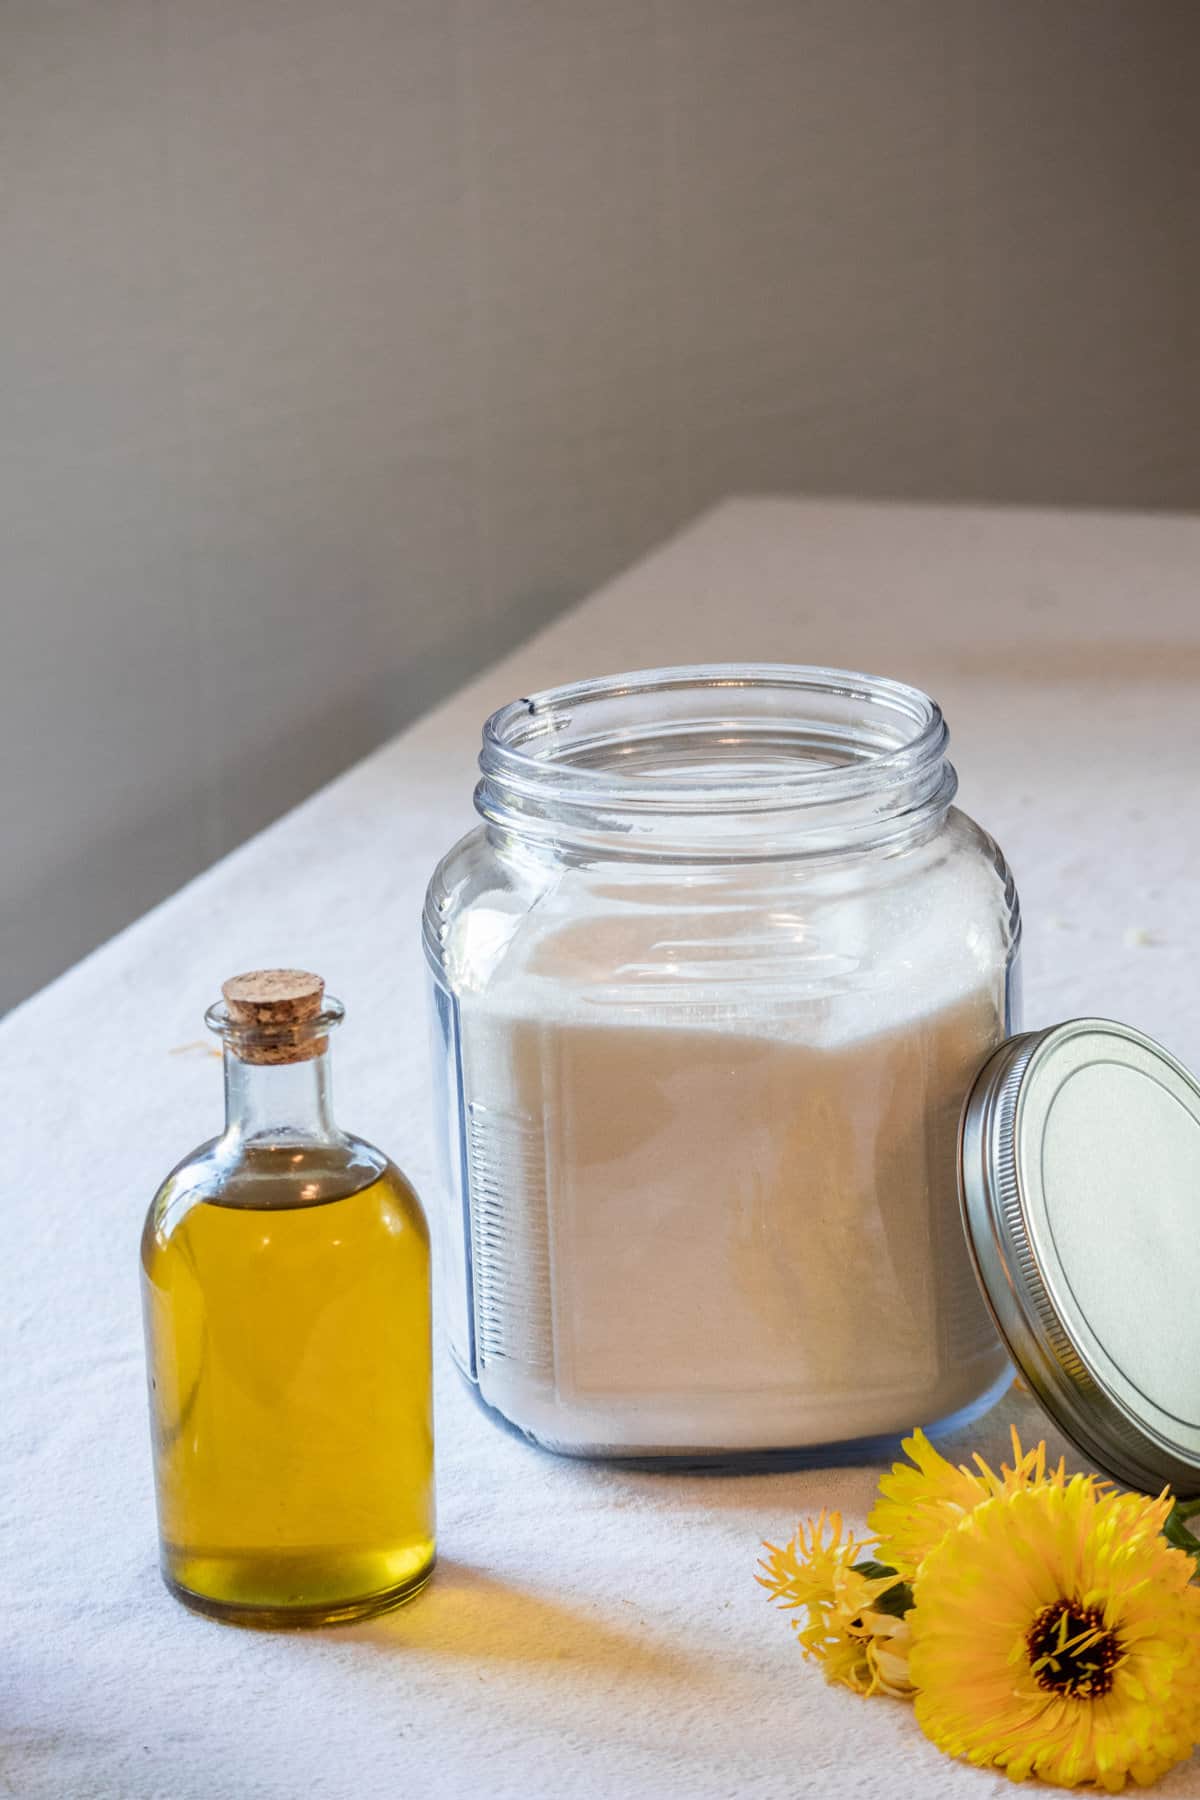 A bottle of calendula oil next to a container of sugar